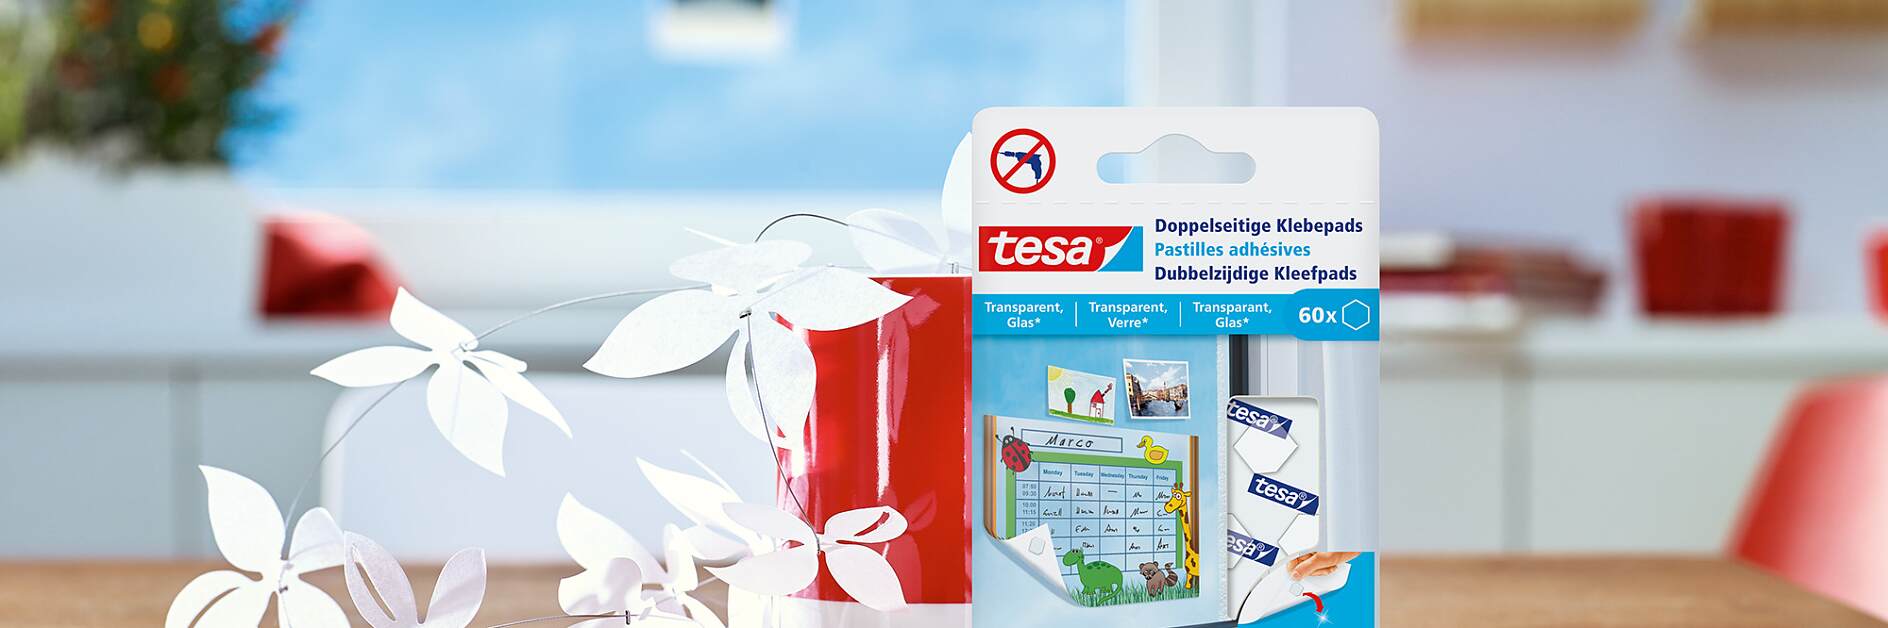 https://www.tesa.com/de-de/files/images/201610/3/how-to-use-tesa-double-sided-adhesive-pads-for-transparent-glass,165516_crop3x1_18.jpg